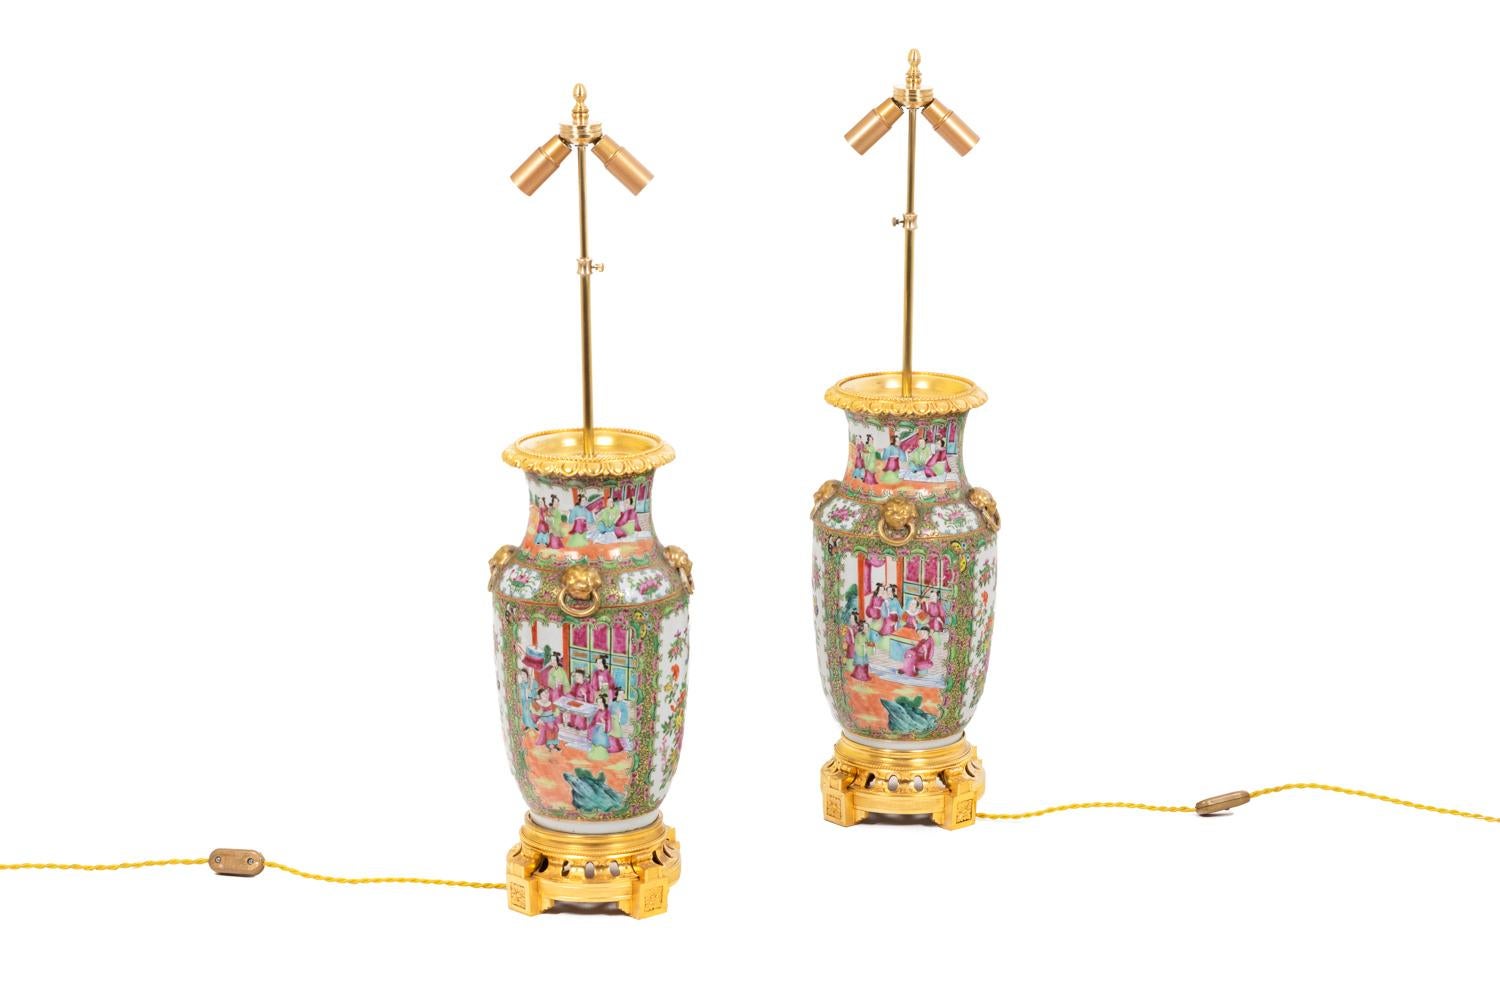 Chinese Export Pair of Lamps in Canton Porcelain, circa 1880